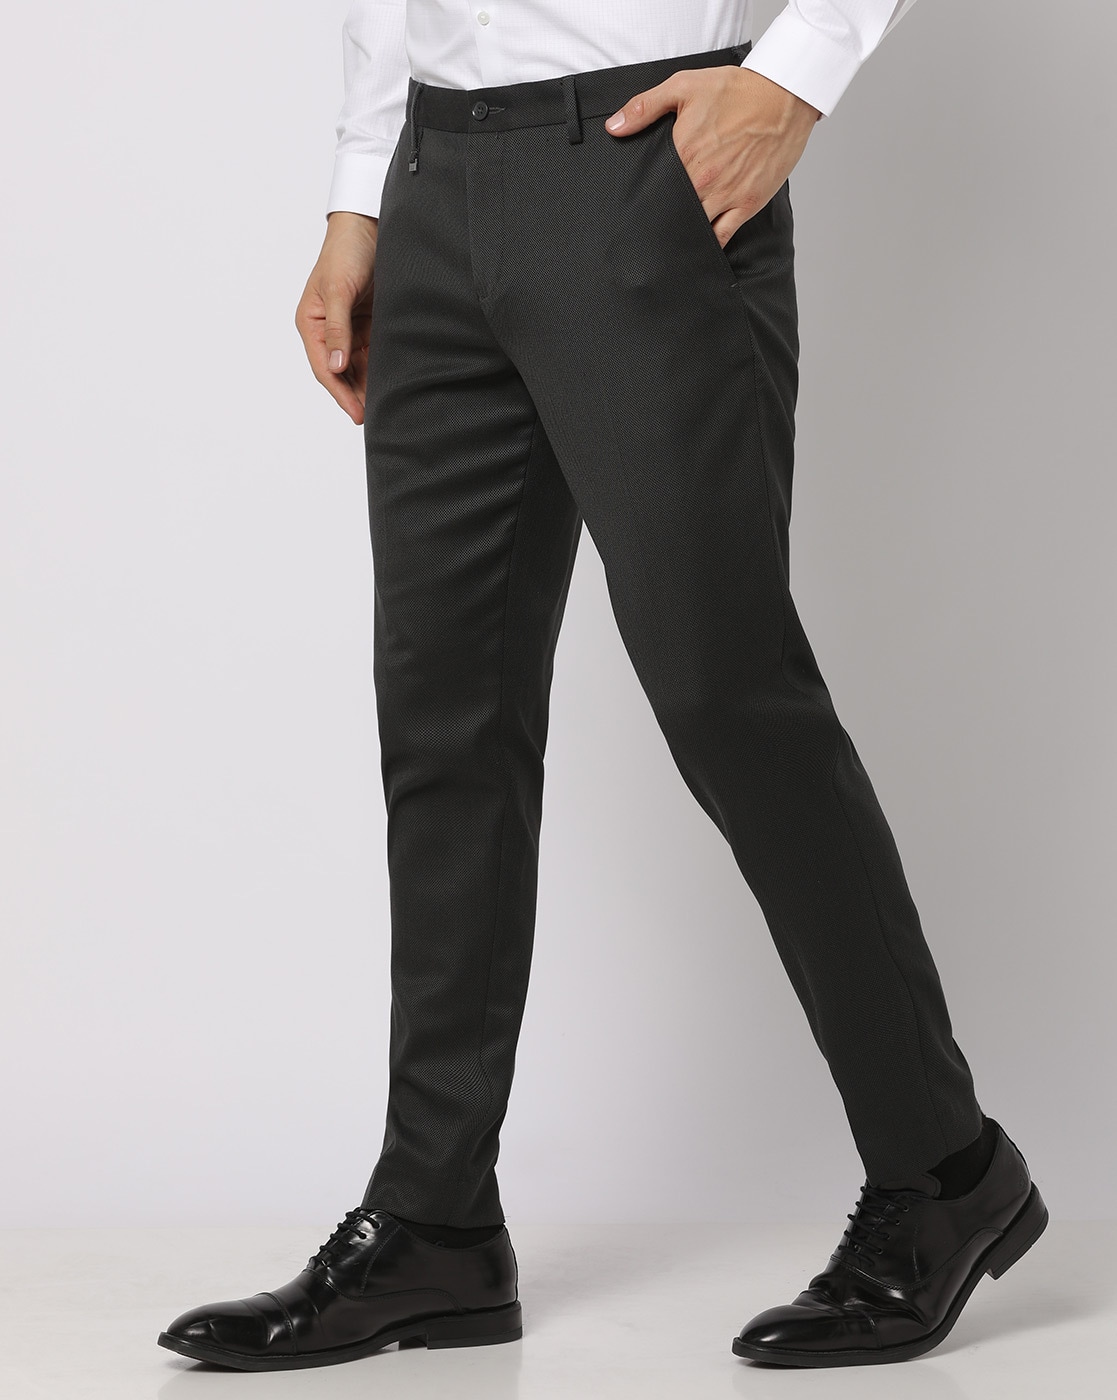 Formal 4 way Stretch Trousers in Charcoal Grey Slim Fit